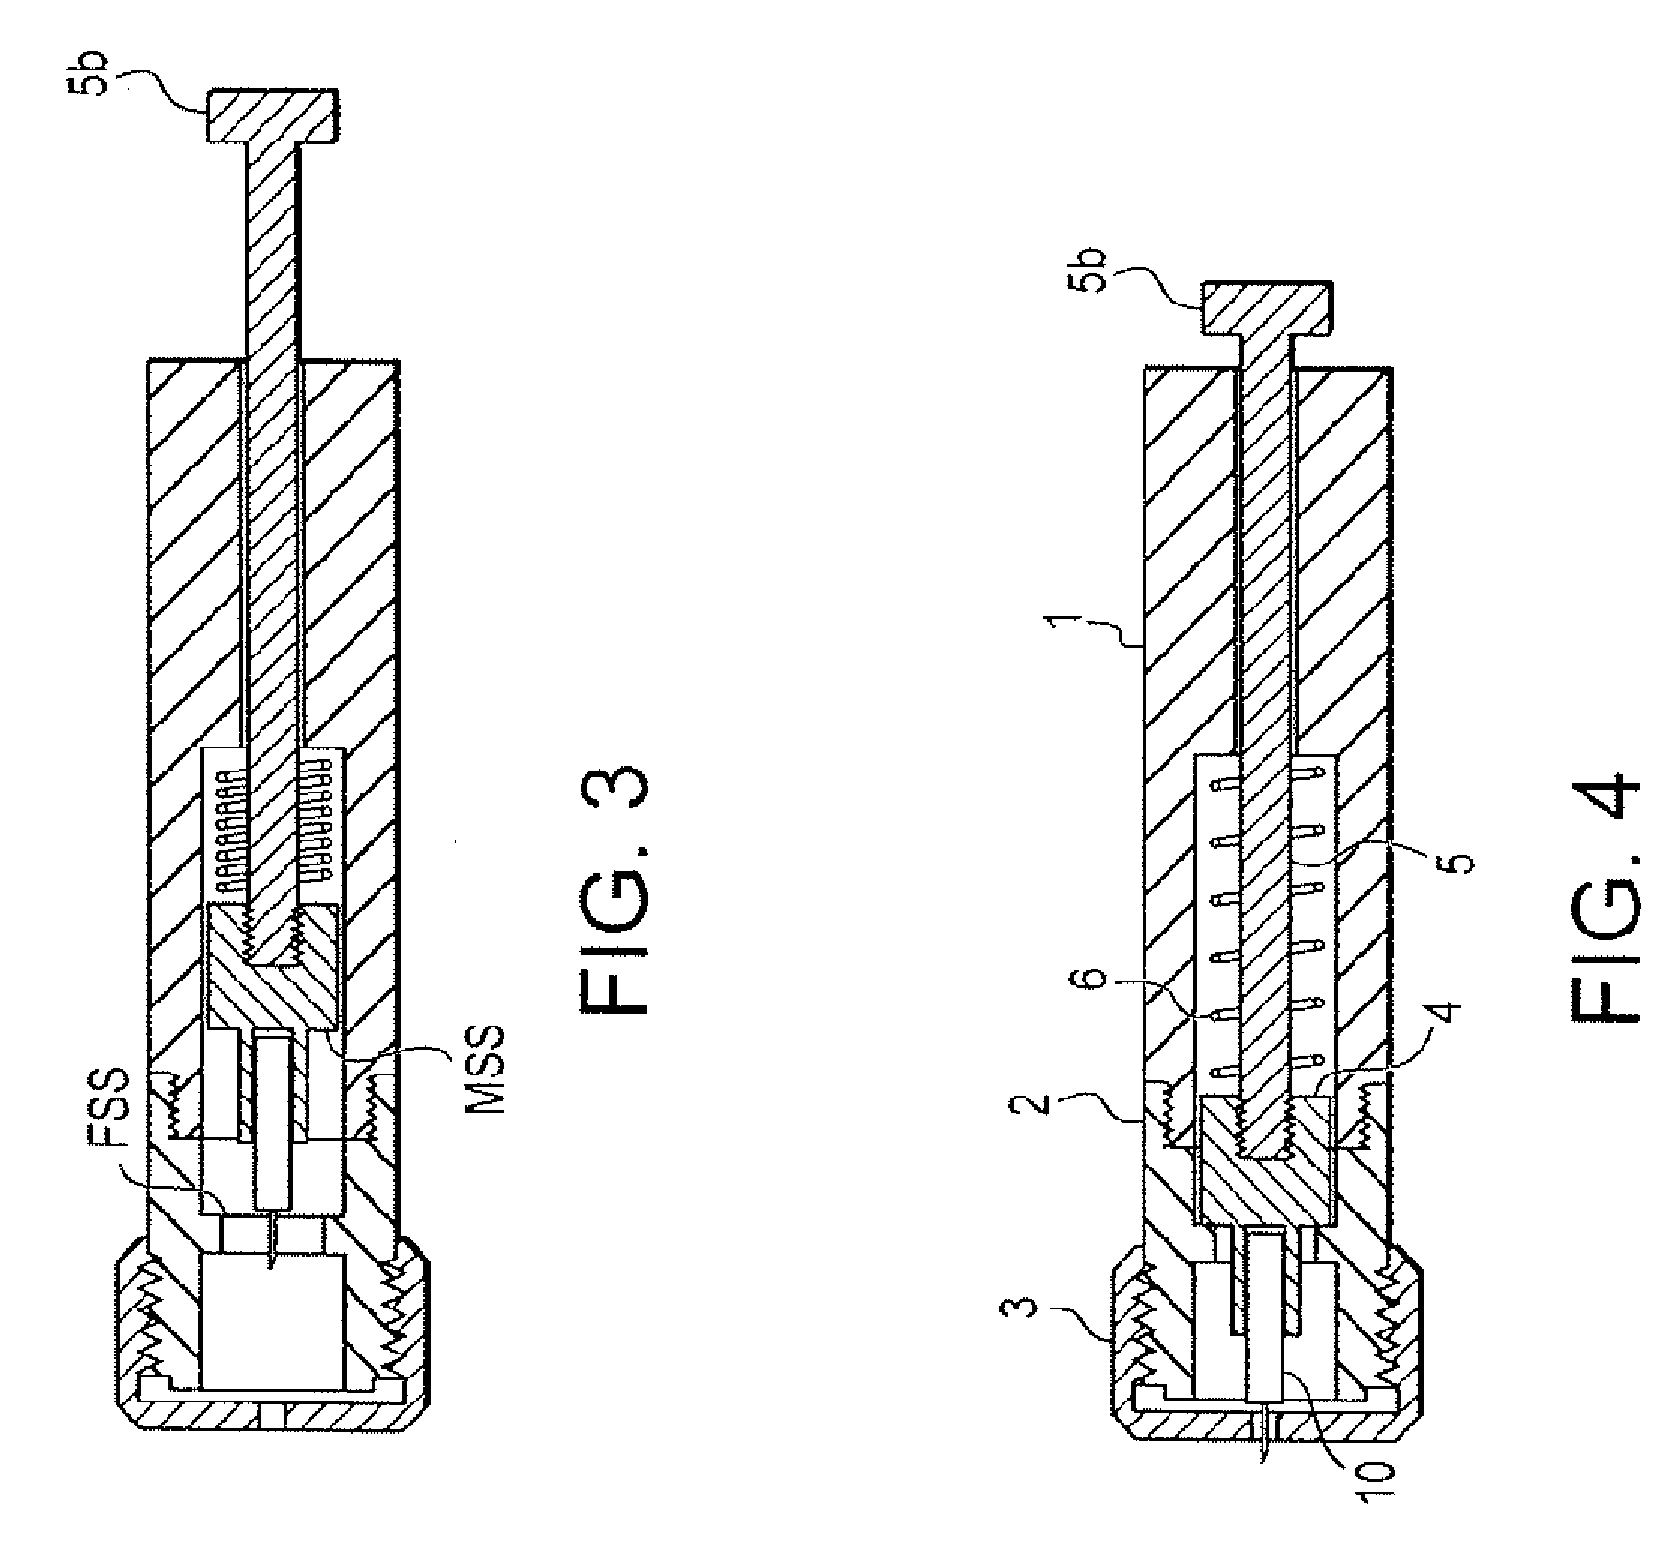 Lancet device, removal system for lancet device, and method